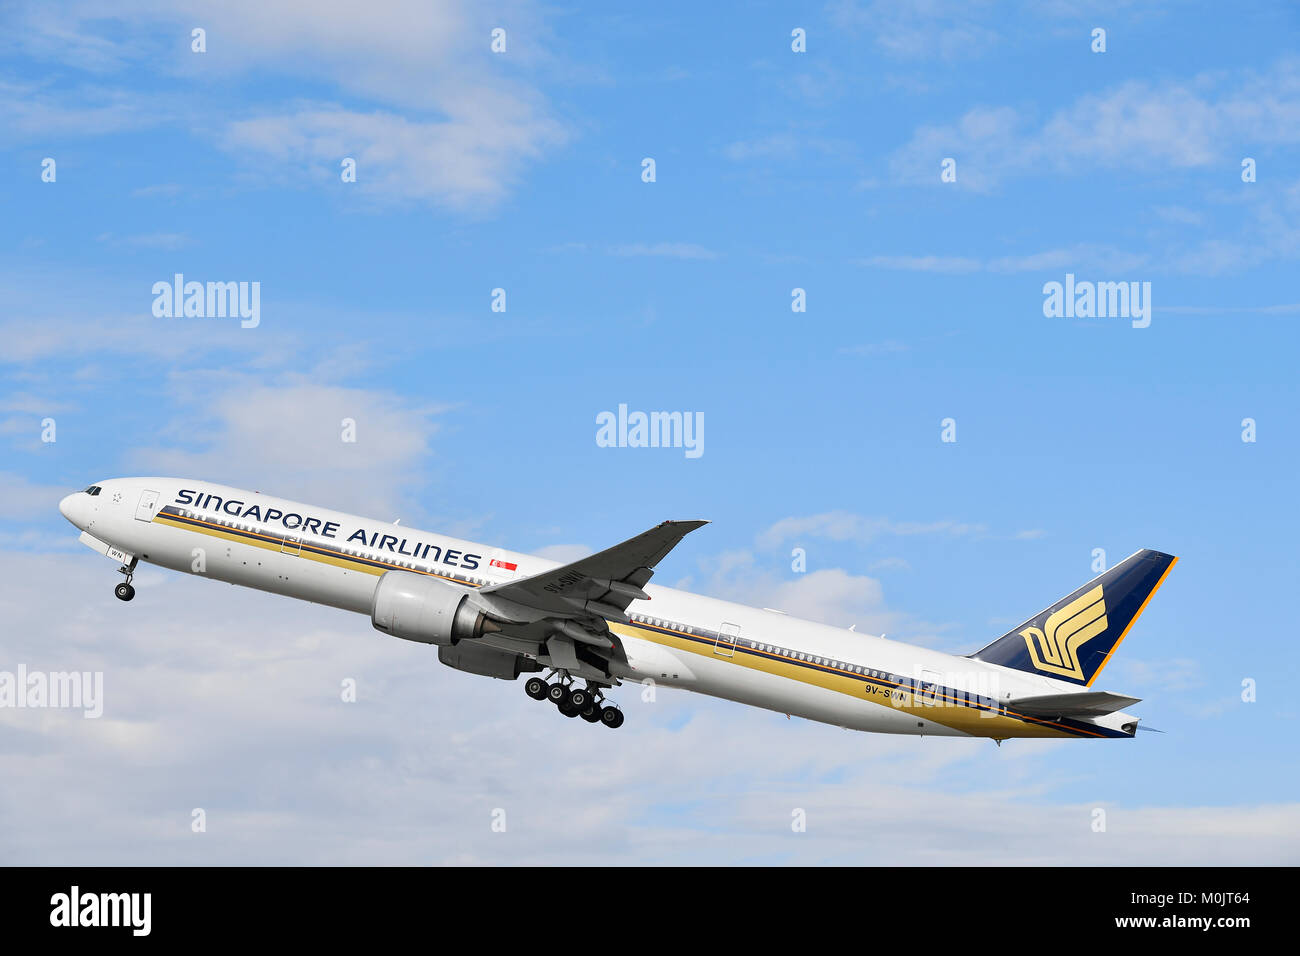 Singapore Airlines Airbus A350 900 Take Off Munich Airport Germany Stock Photo Alamy